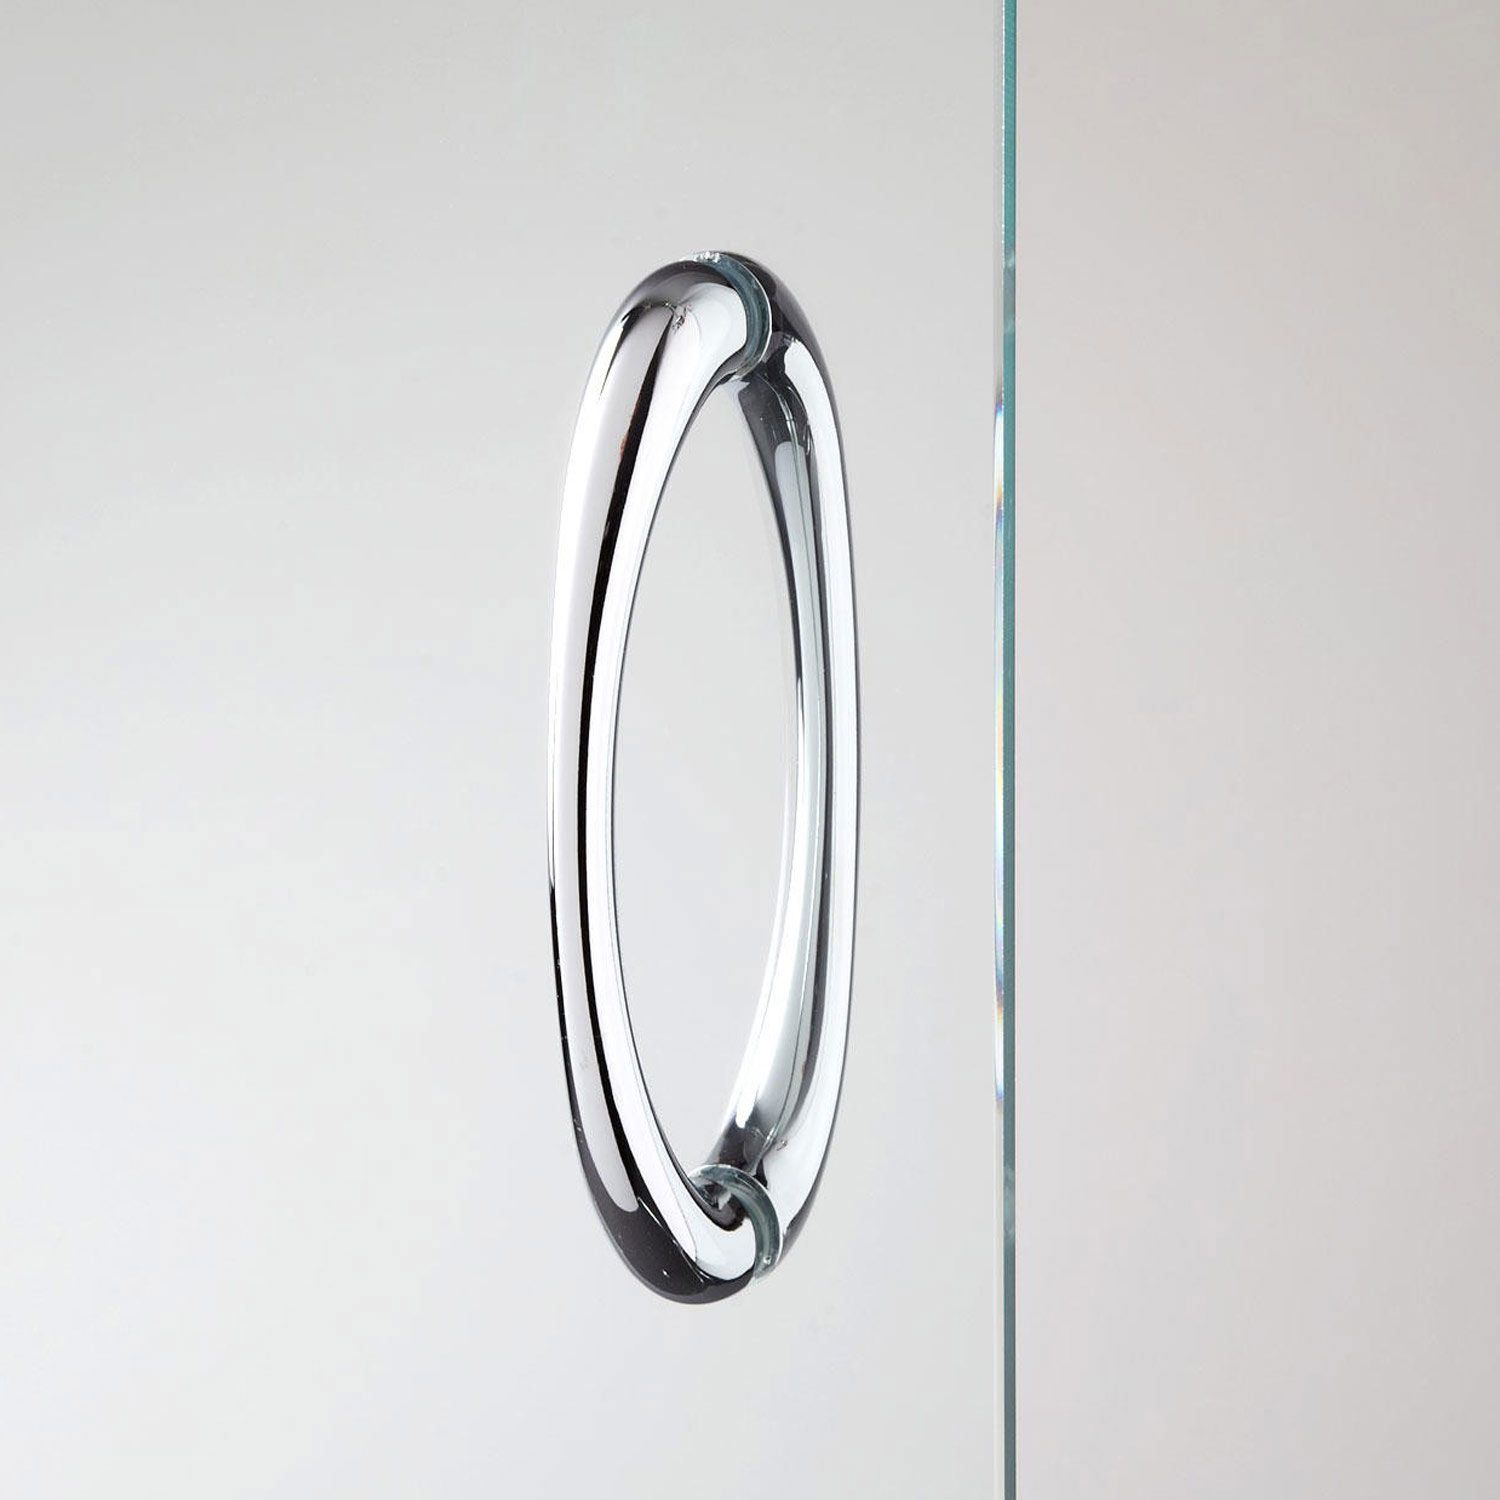 Shower enclosure sliding opening H185 198 aluminum frame tempered glass 6mm transparent or opaque in different sizes B52